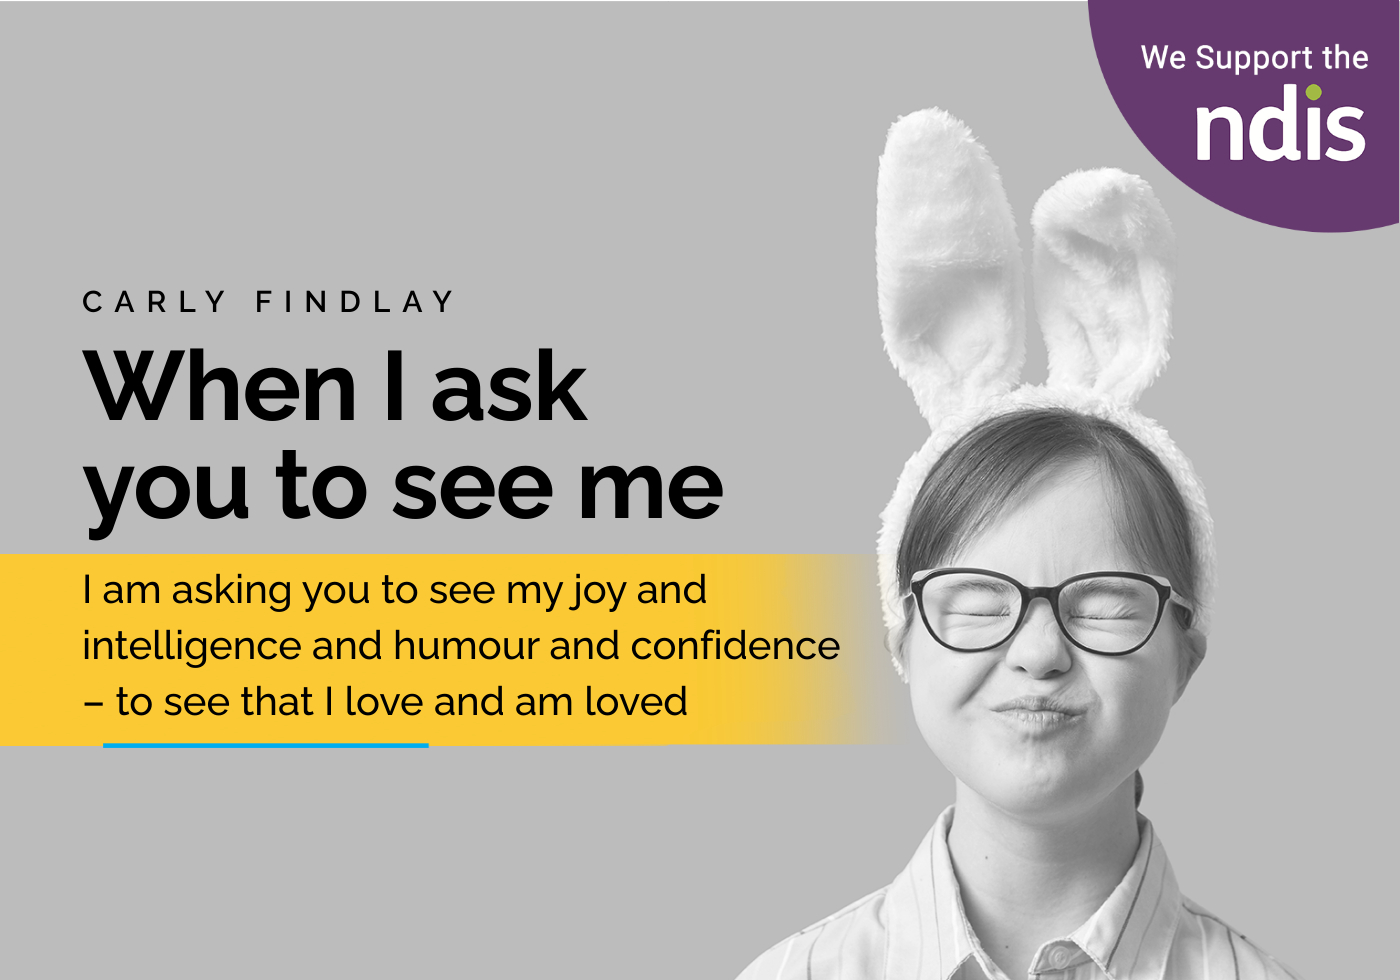 A young girl dressed like a bunny using eye gestures to address being herself as When I ask you to see me in "Digital Marketing for Disability Provider".